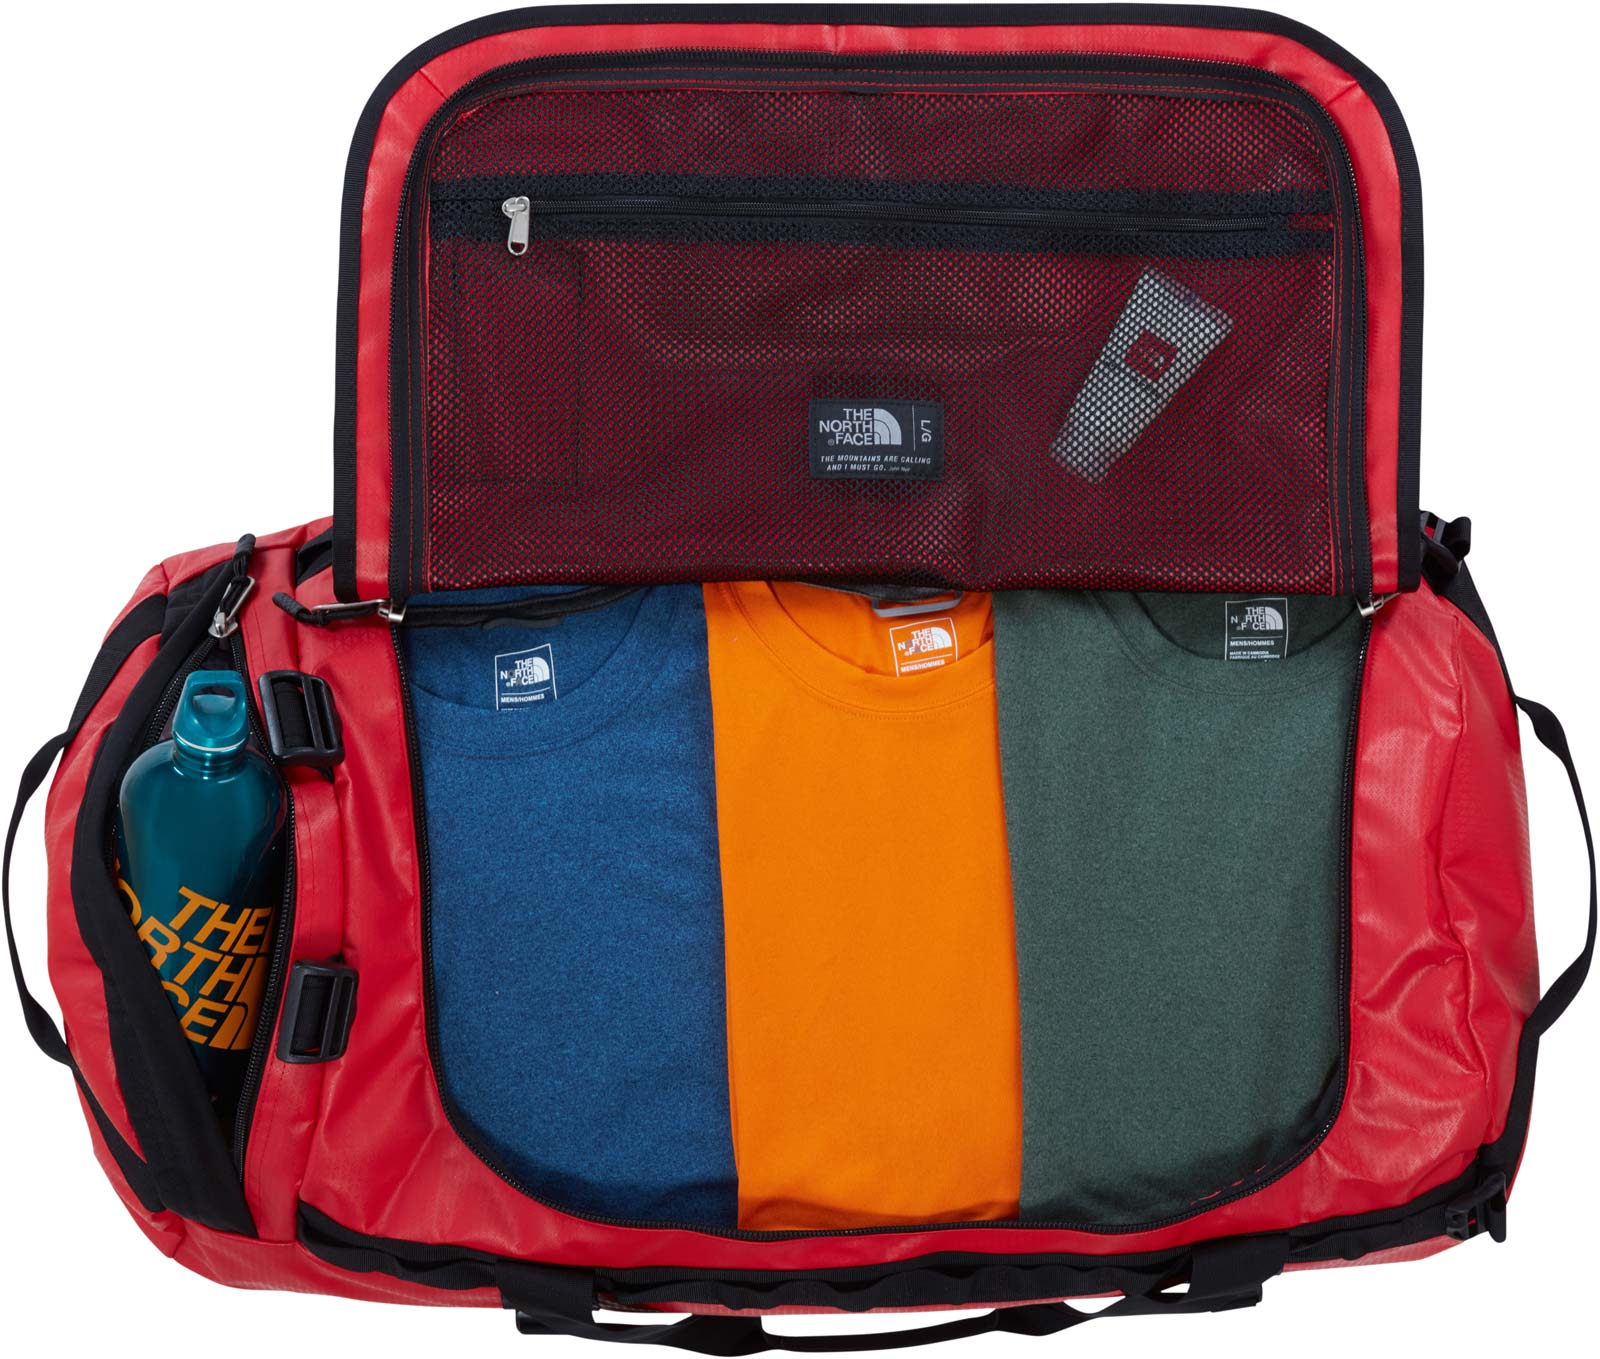 Face camp. The North face сумка Base Camp. Сумка спортивная the North face Base Camp Duffel - s. The North face Base Camp Duffel l Red. The North face сумка Base Camp Voyager Messenger.